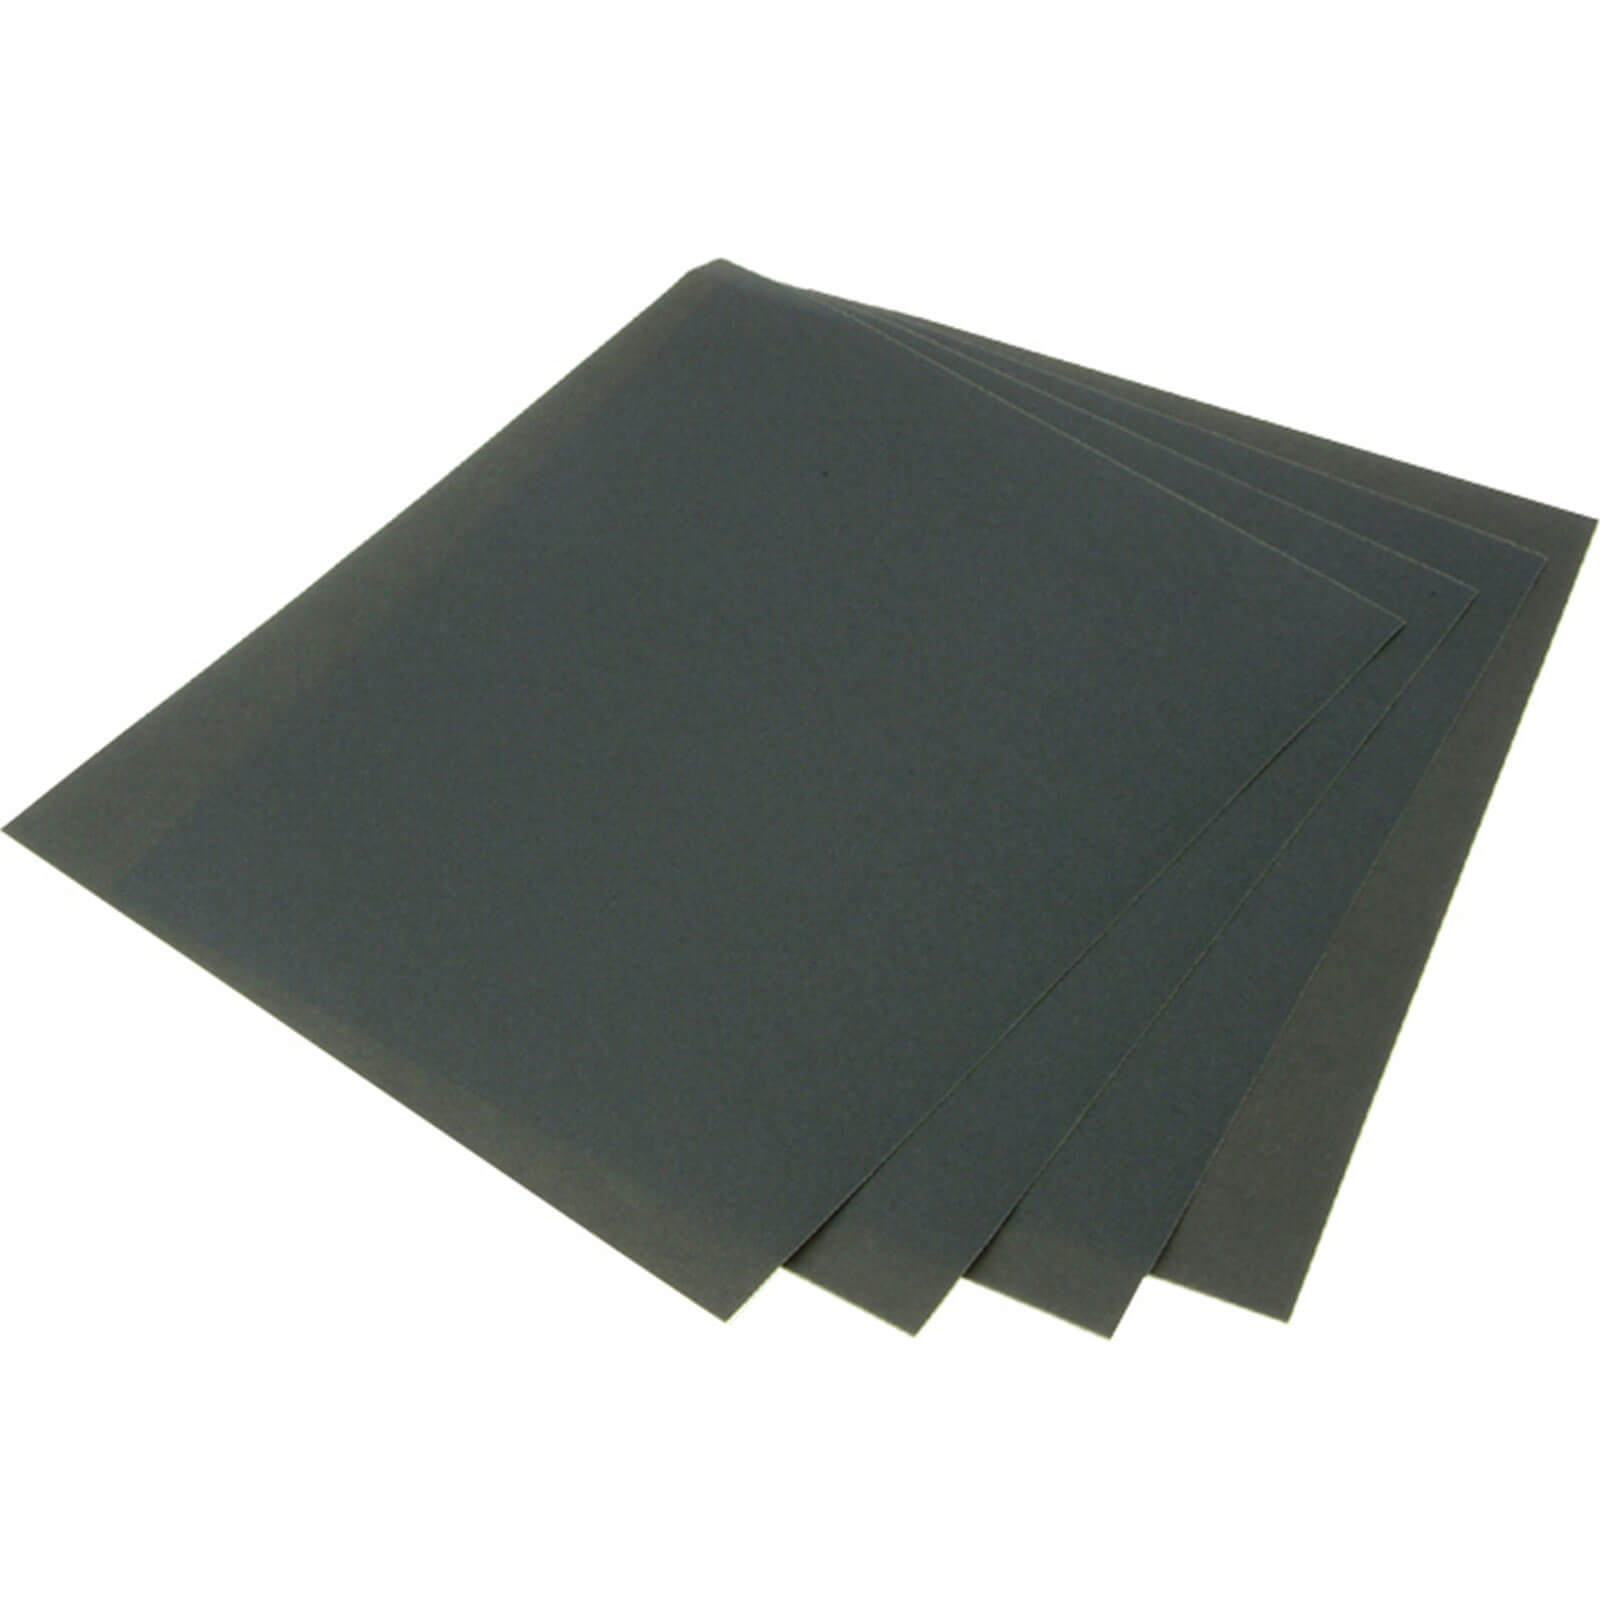 Image of Faithfull Wet and Dry Paper Sheets 230 x 280mm 1200g Pack of 25